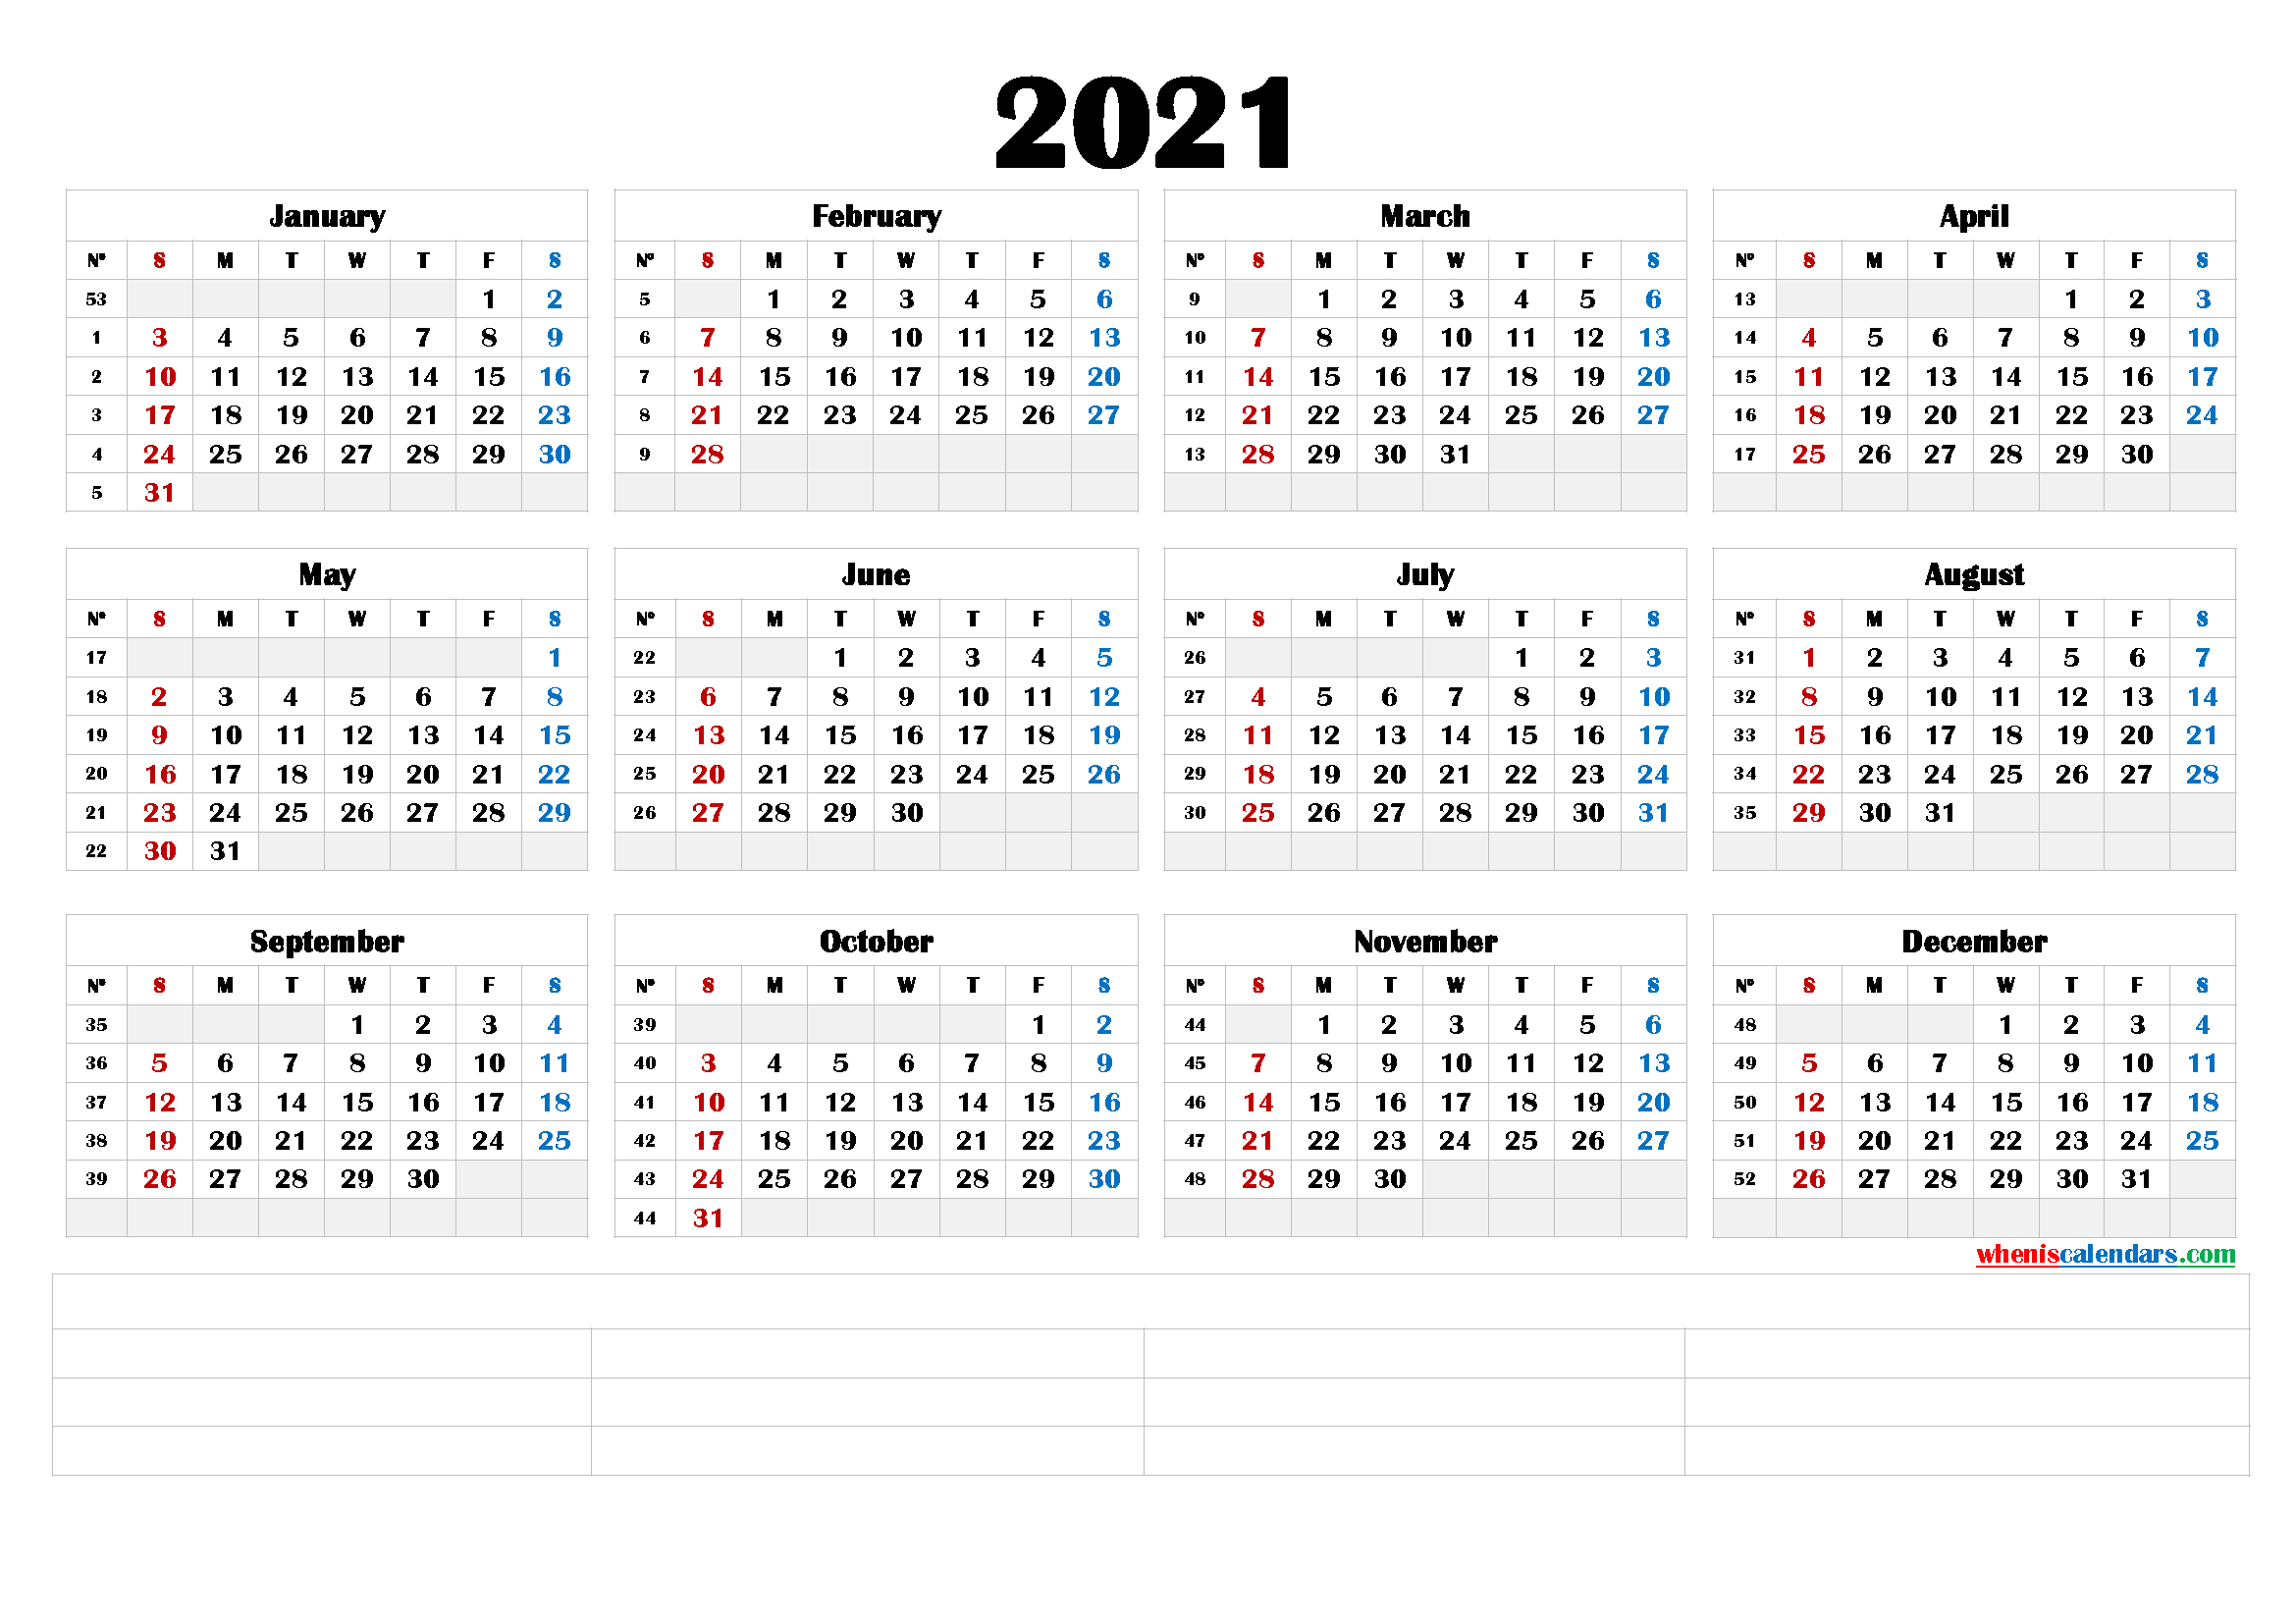 Free 2021 Yearly Calender Template - 24 Pretty Free